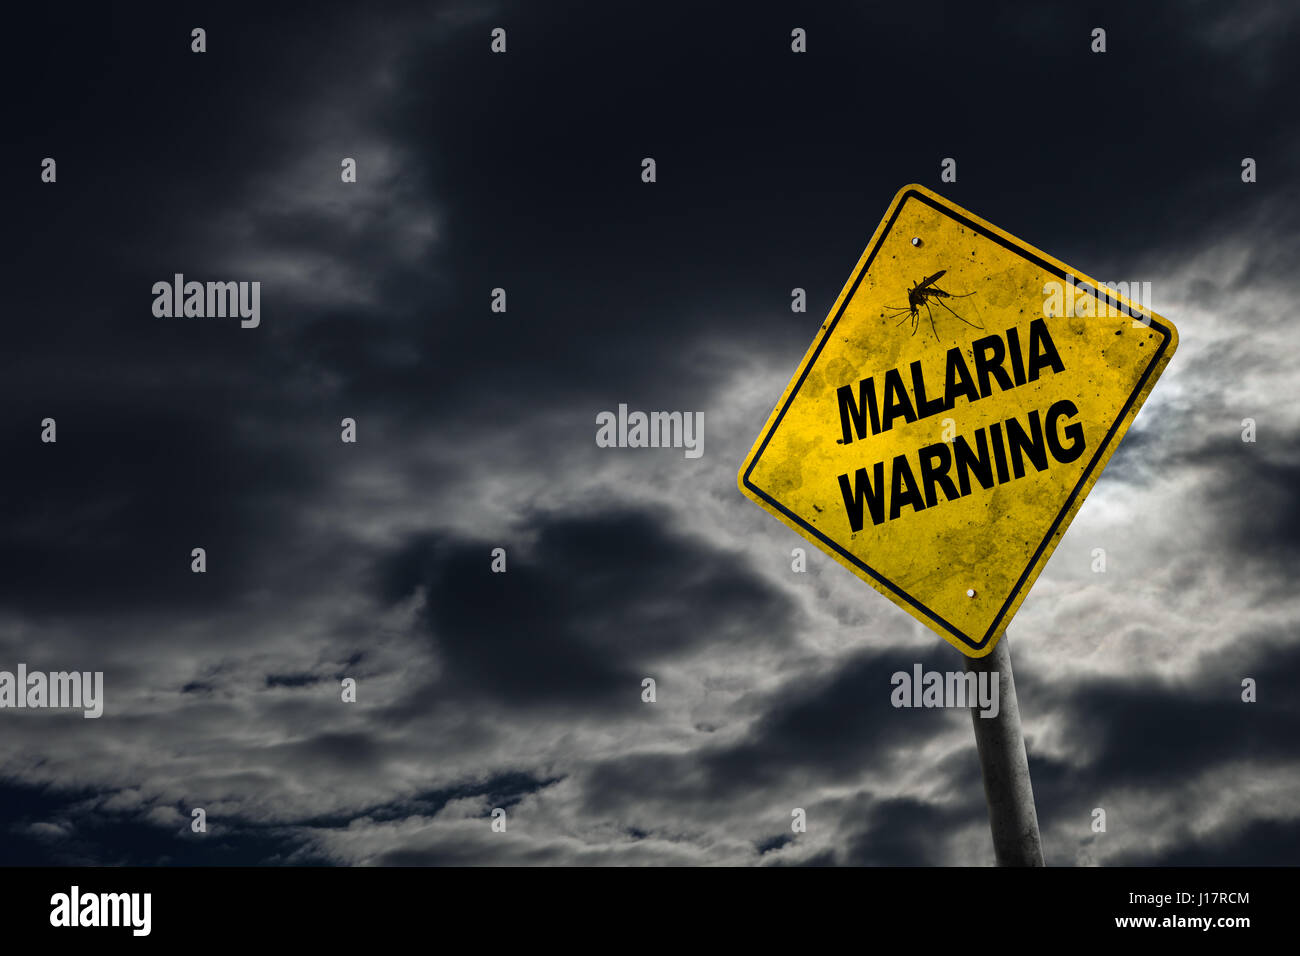 Malaria warning sign against a stormy background with dirty and angled sign for drama. Malaria is a life-threatening disease caused by parasites that  Stock Photo